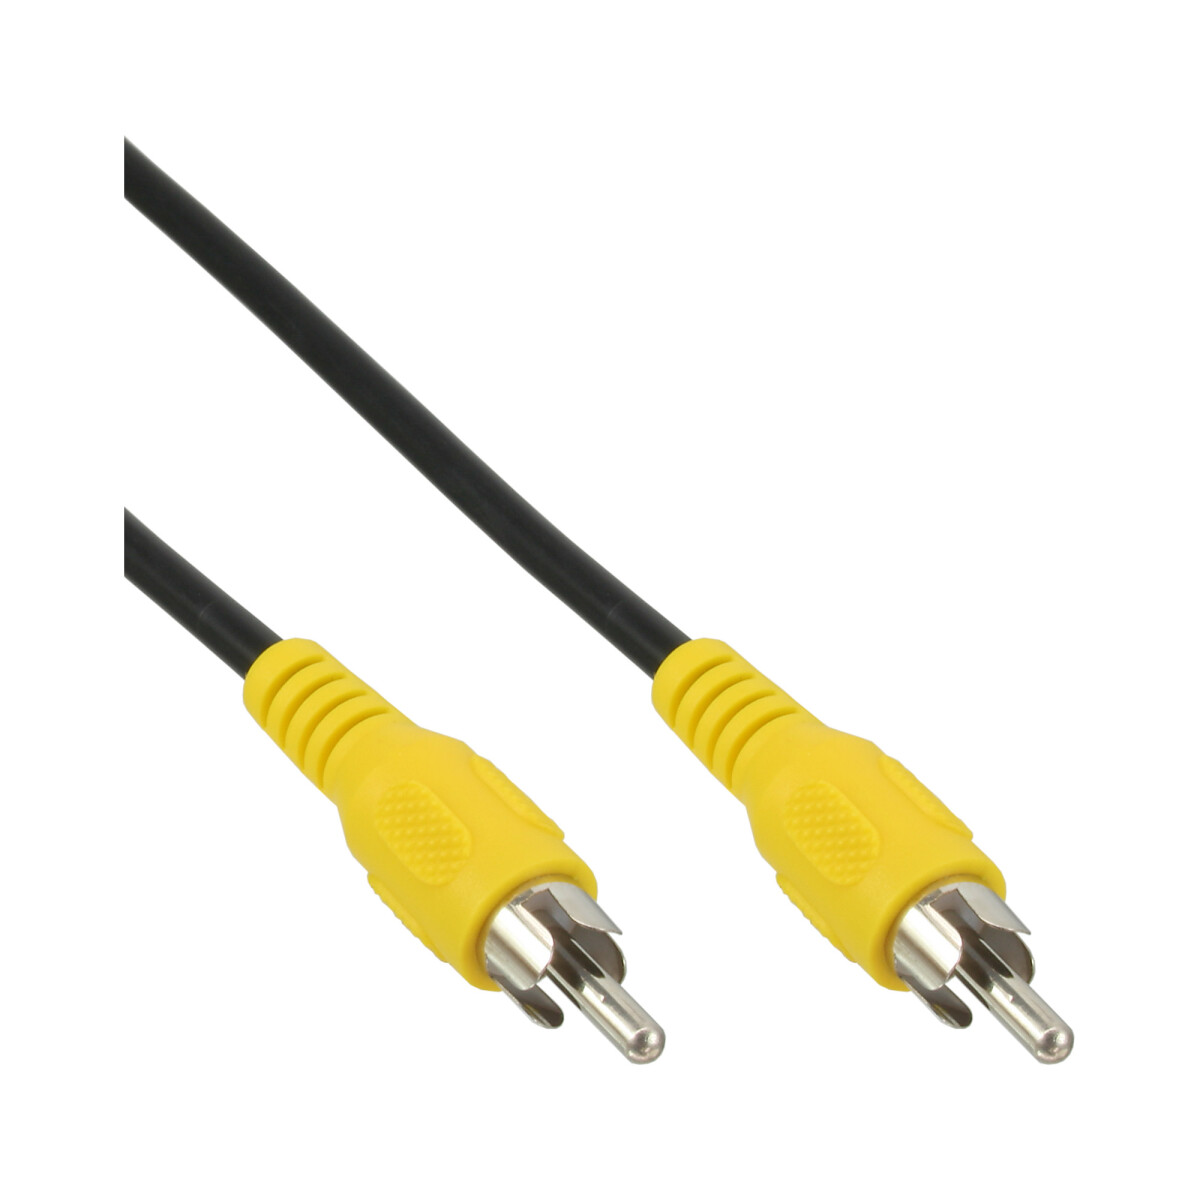 InLine® Video cable, 1x RCA M/M, yellow plugs, 7m